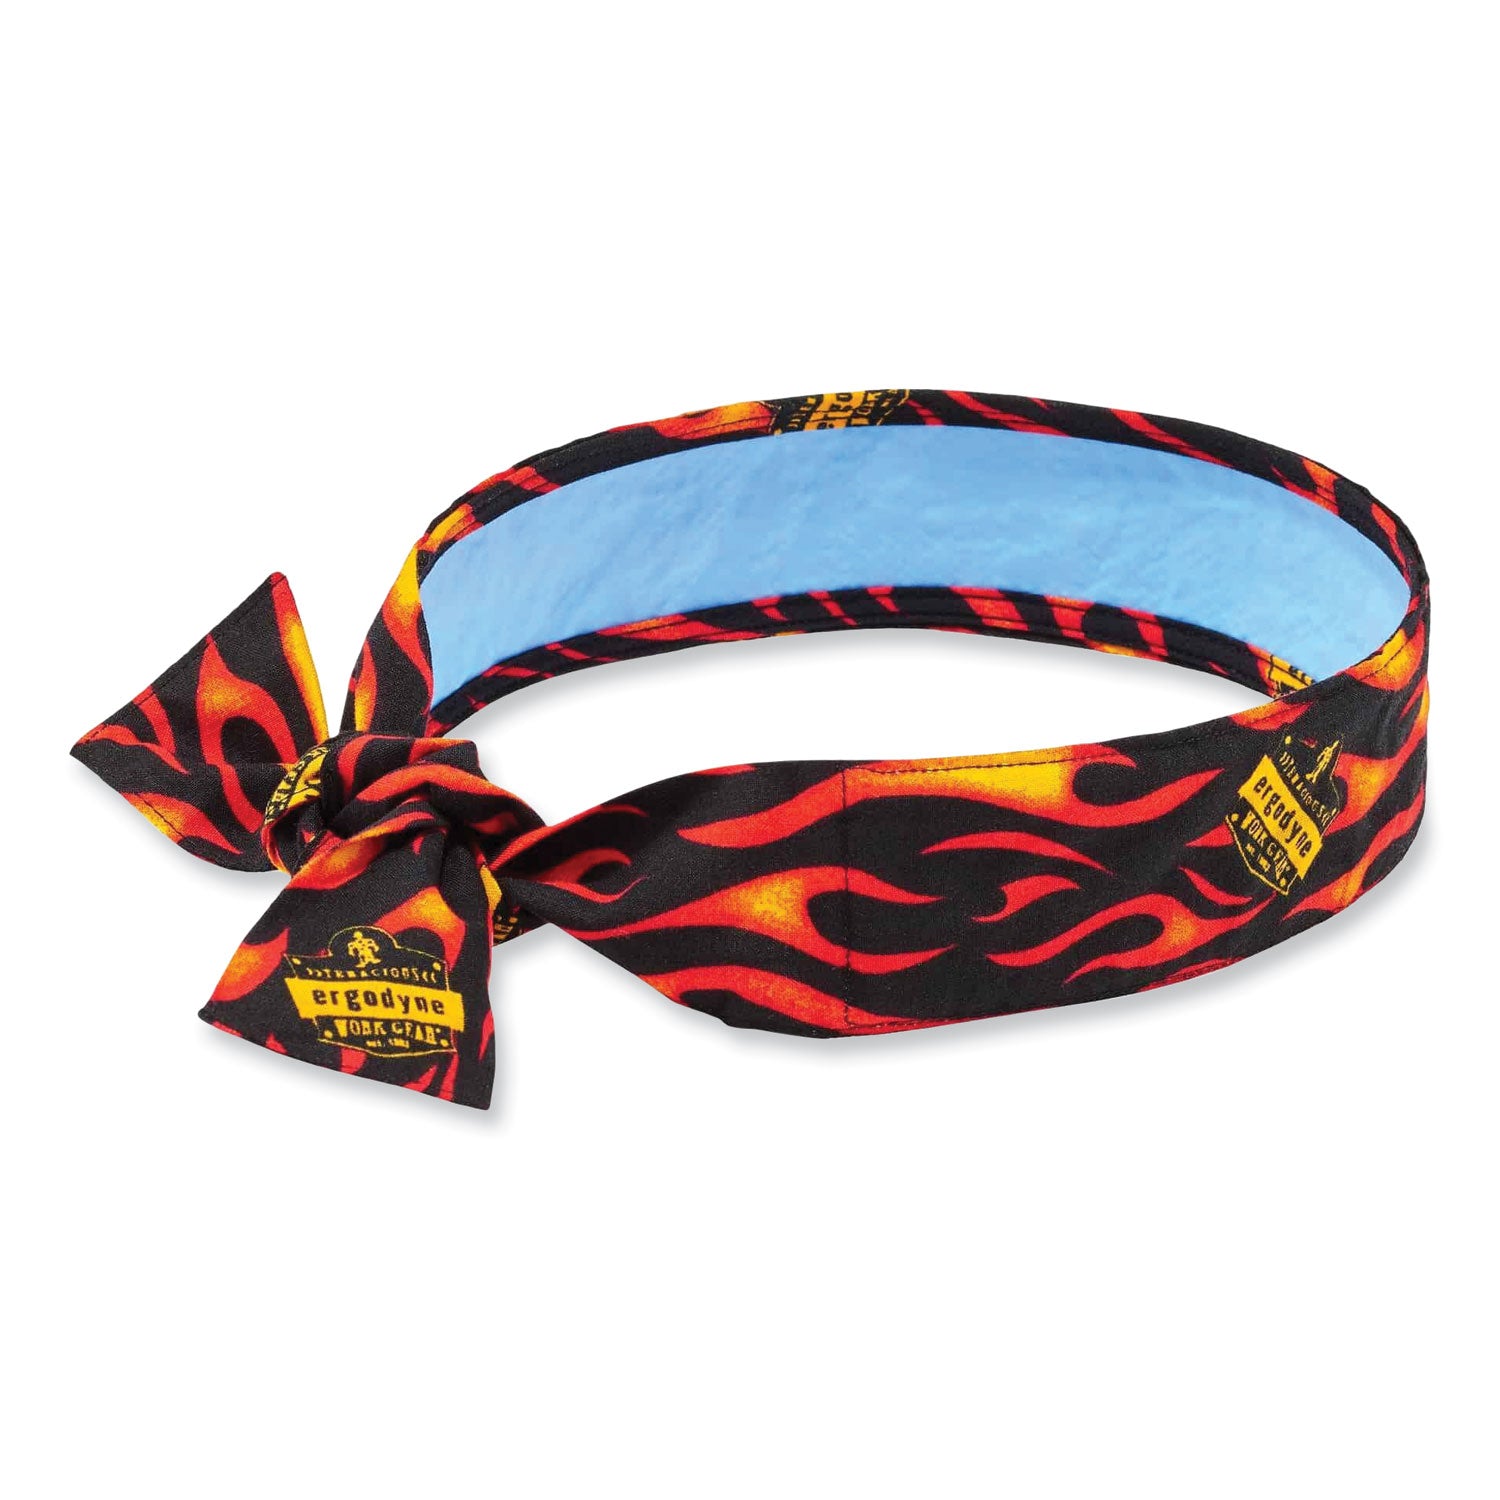 chill-its-6700ct-cooling-bandana-pva-tie-headband-one-size-fits-most-flames-ships-in-1-3-business-days_ego12568 - 1